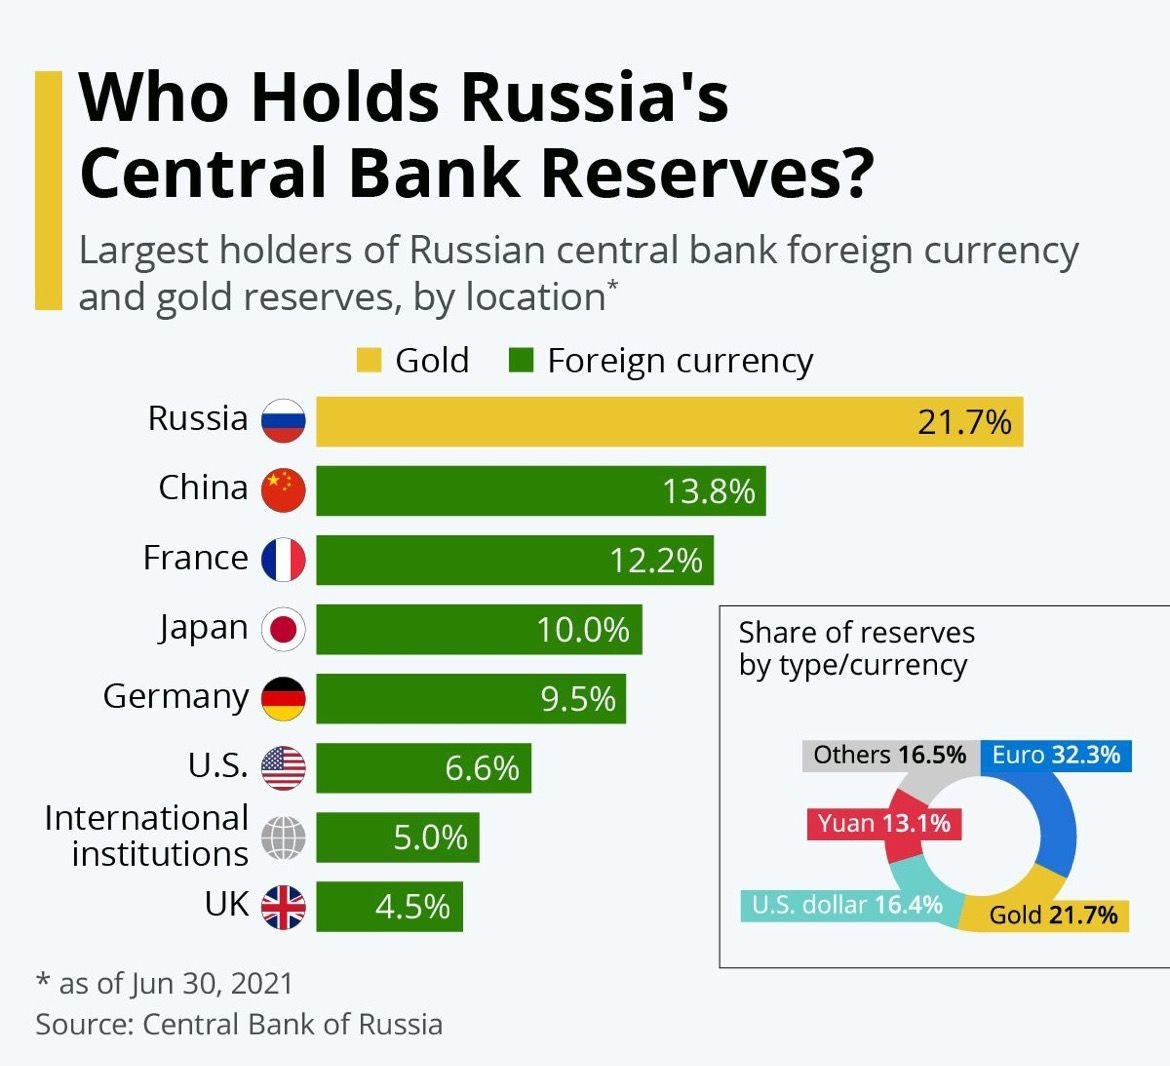 who holds russia's central bank reserves?